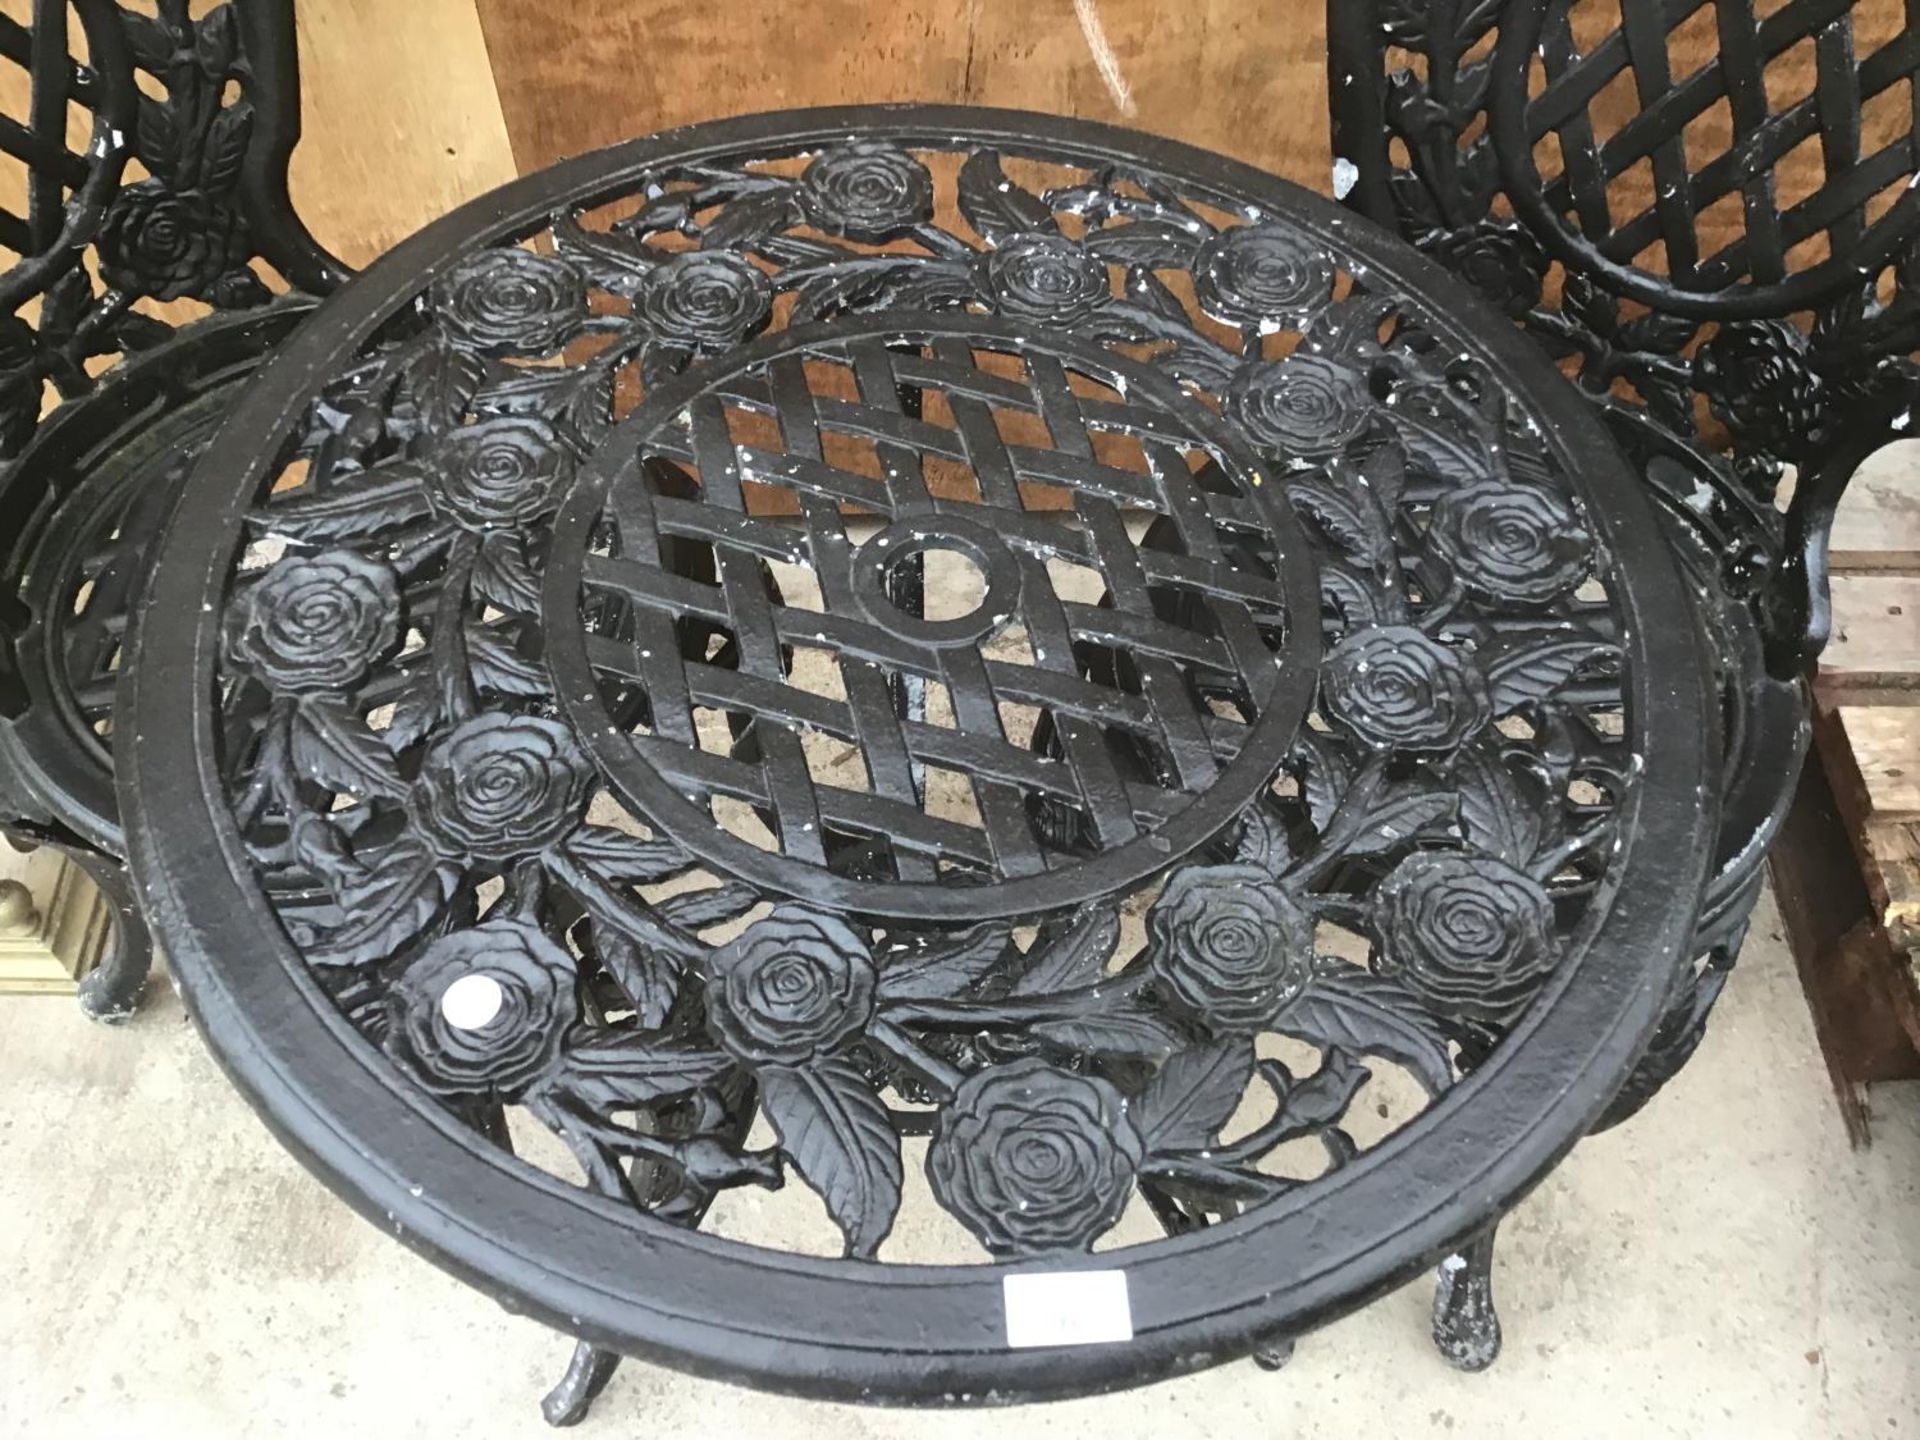 A HEAVY CAST IRON ROSE DESIGN TABLE WITH TWO MATCHING CHAIRS - Image 3 of 4